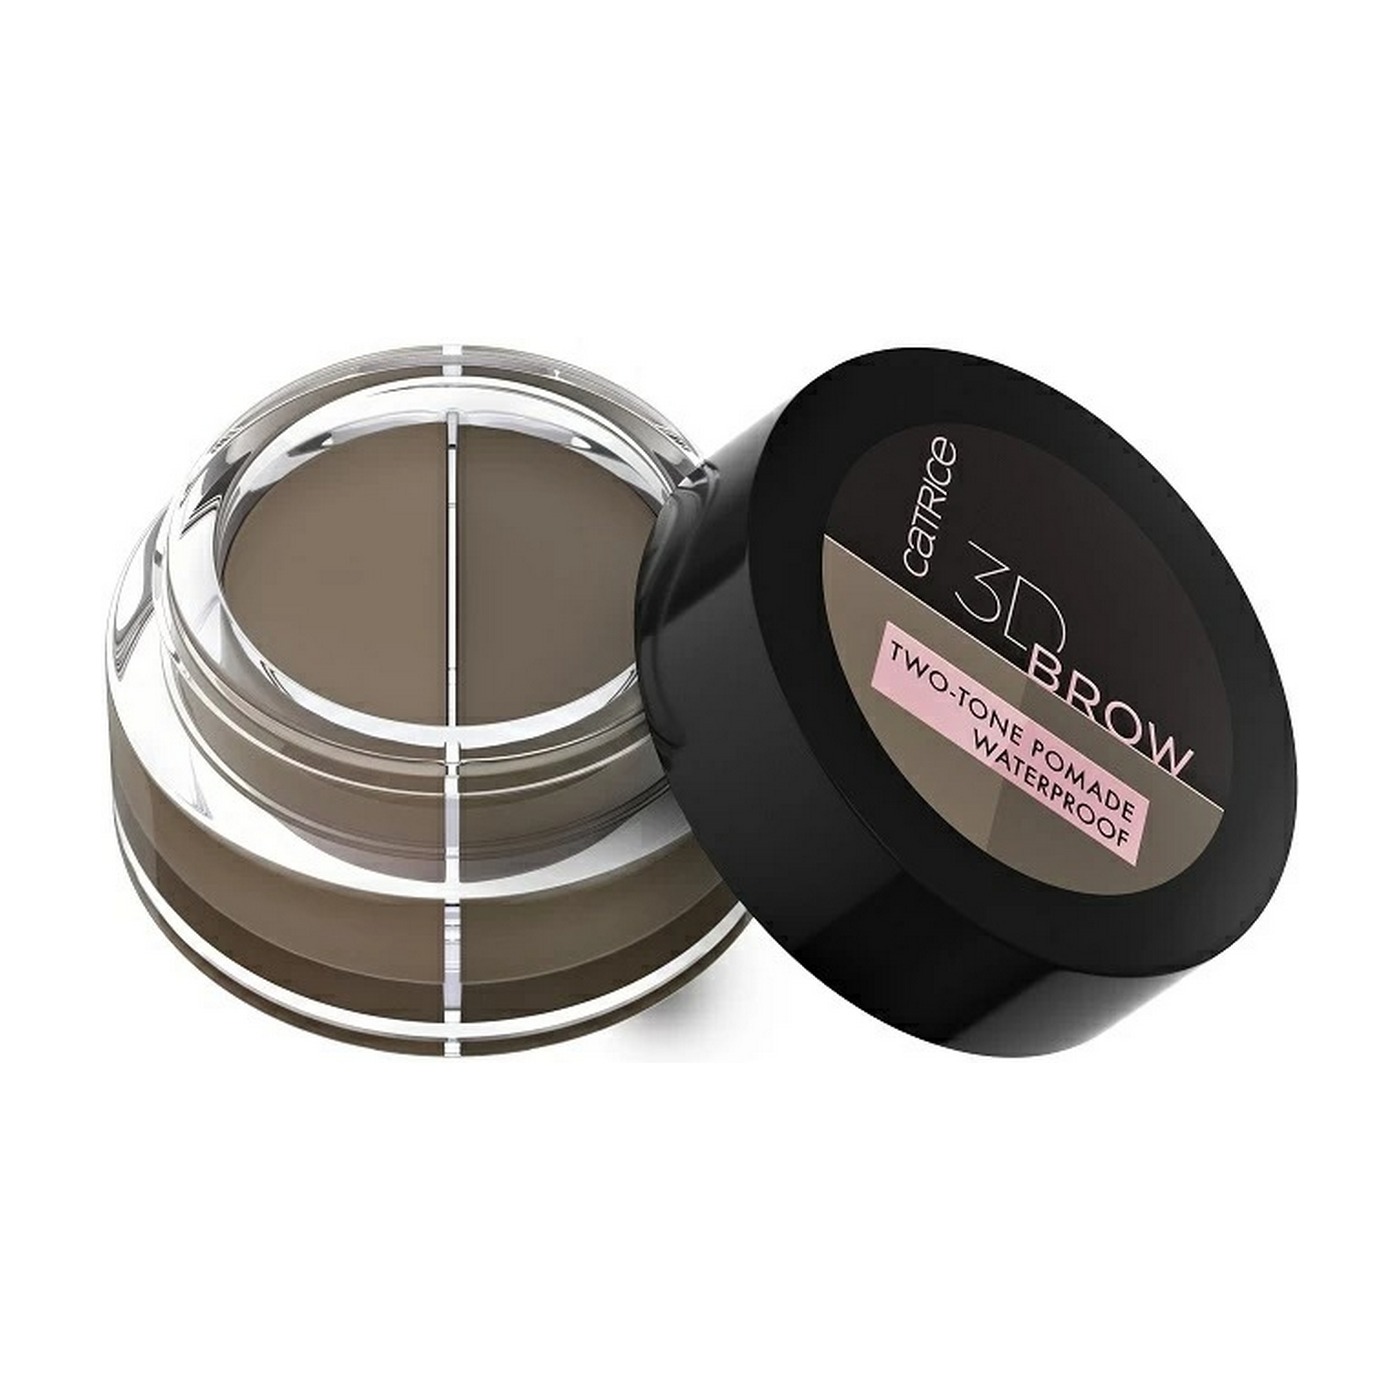 Catrice brow. Catrice помада для бровей 3d Brow two-Tone Pomade Waterproof. Catrice помада для бровей 3d Brow two-Tone Pomade Waterproof 010. Катрис помада для бровей 010. Помадка для бровей ТОПФЕЙС 002.